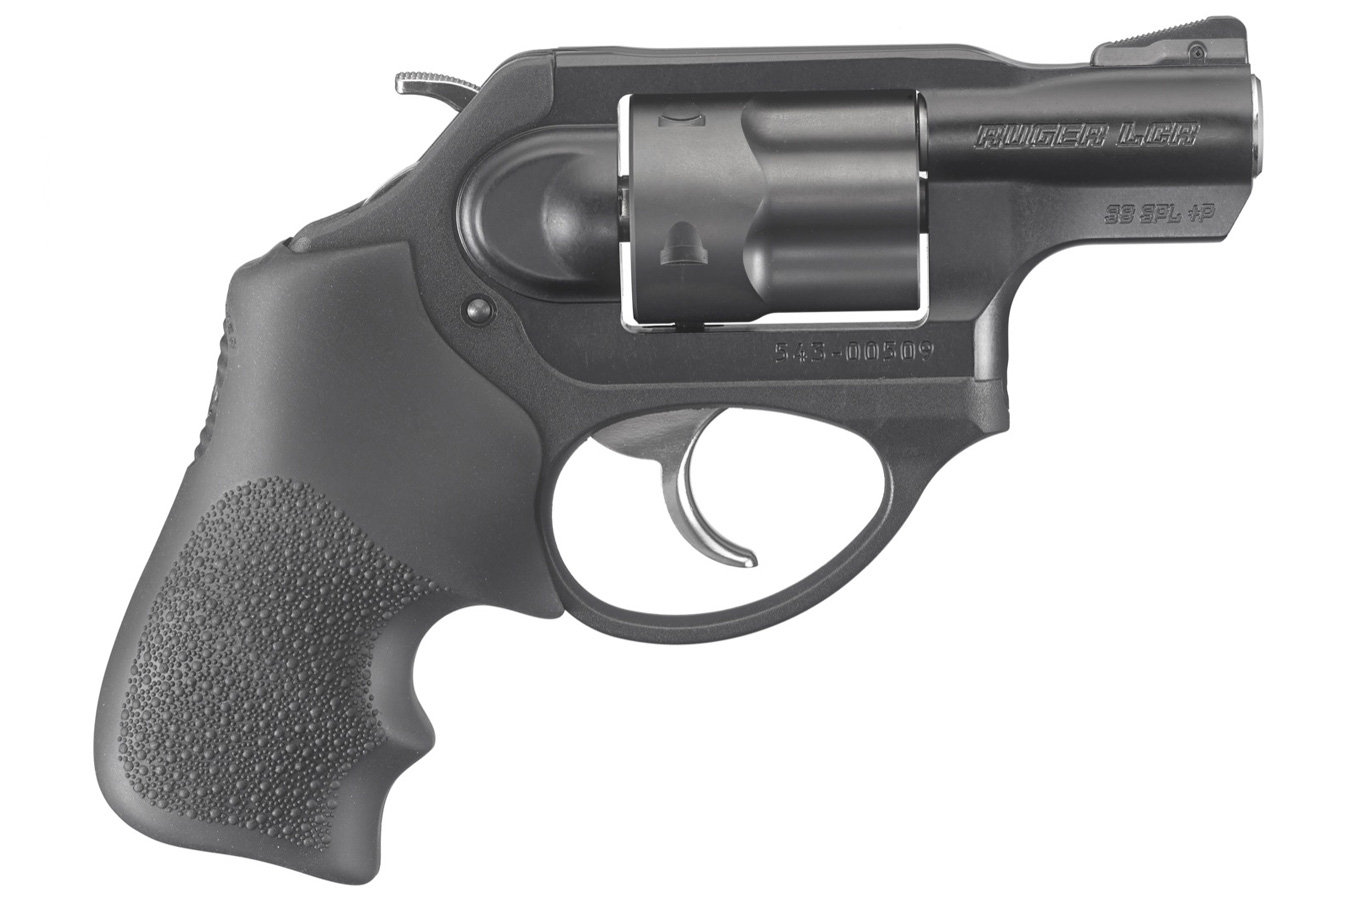 No. 17 Best Selling: RUGER LCR-X 38SPL DOUBLE ACTION REVOLVER